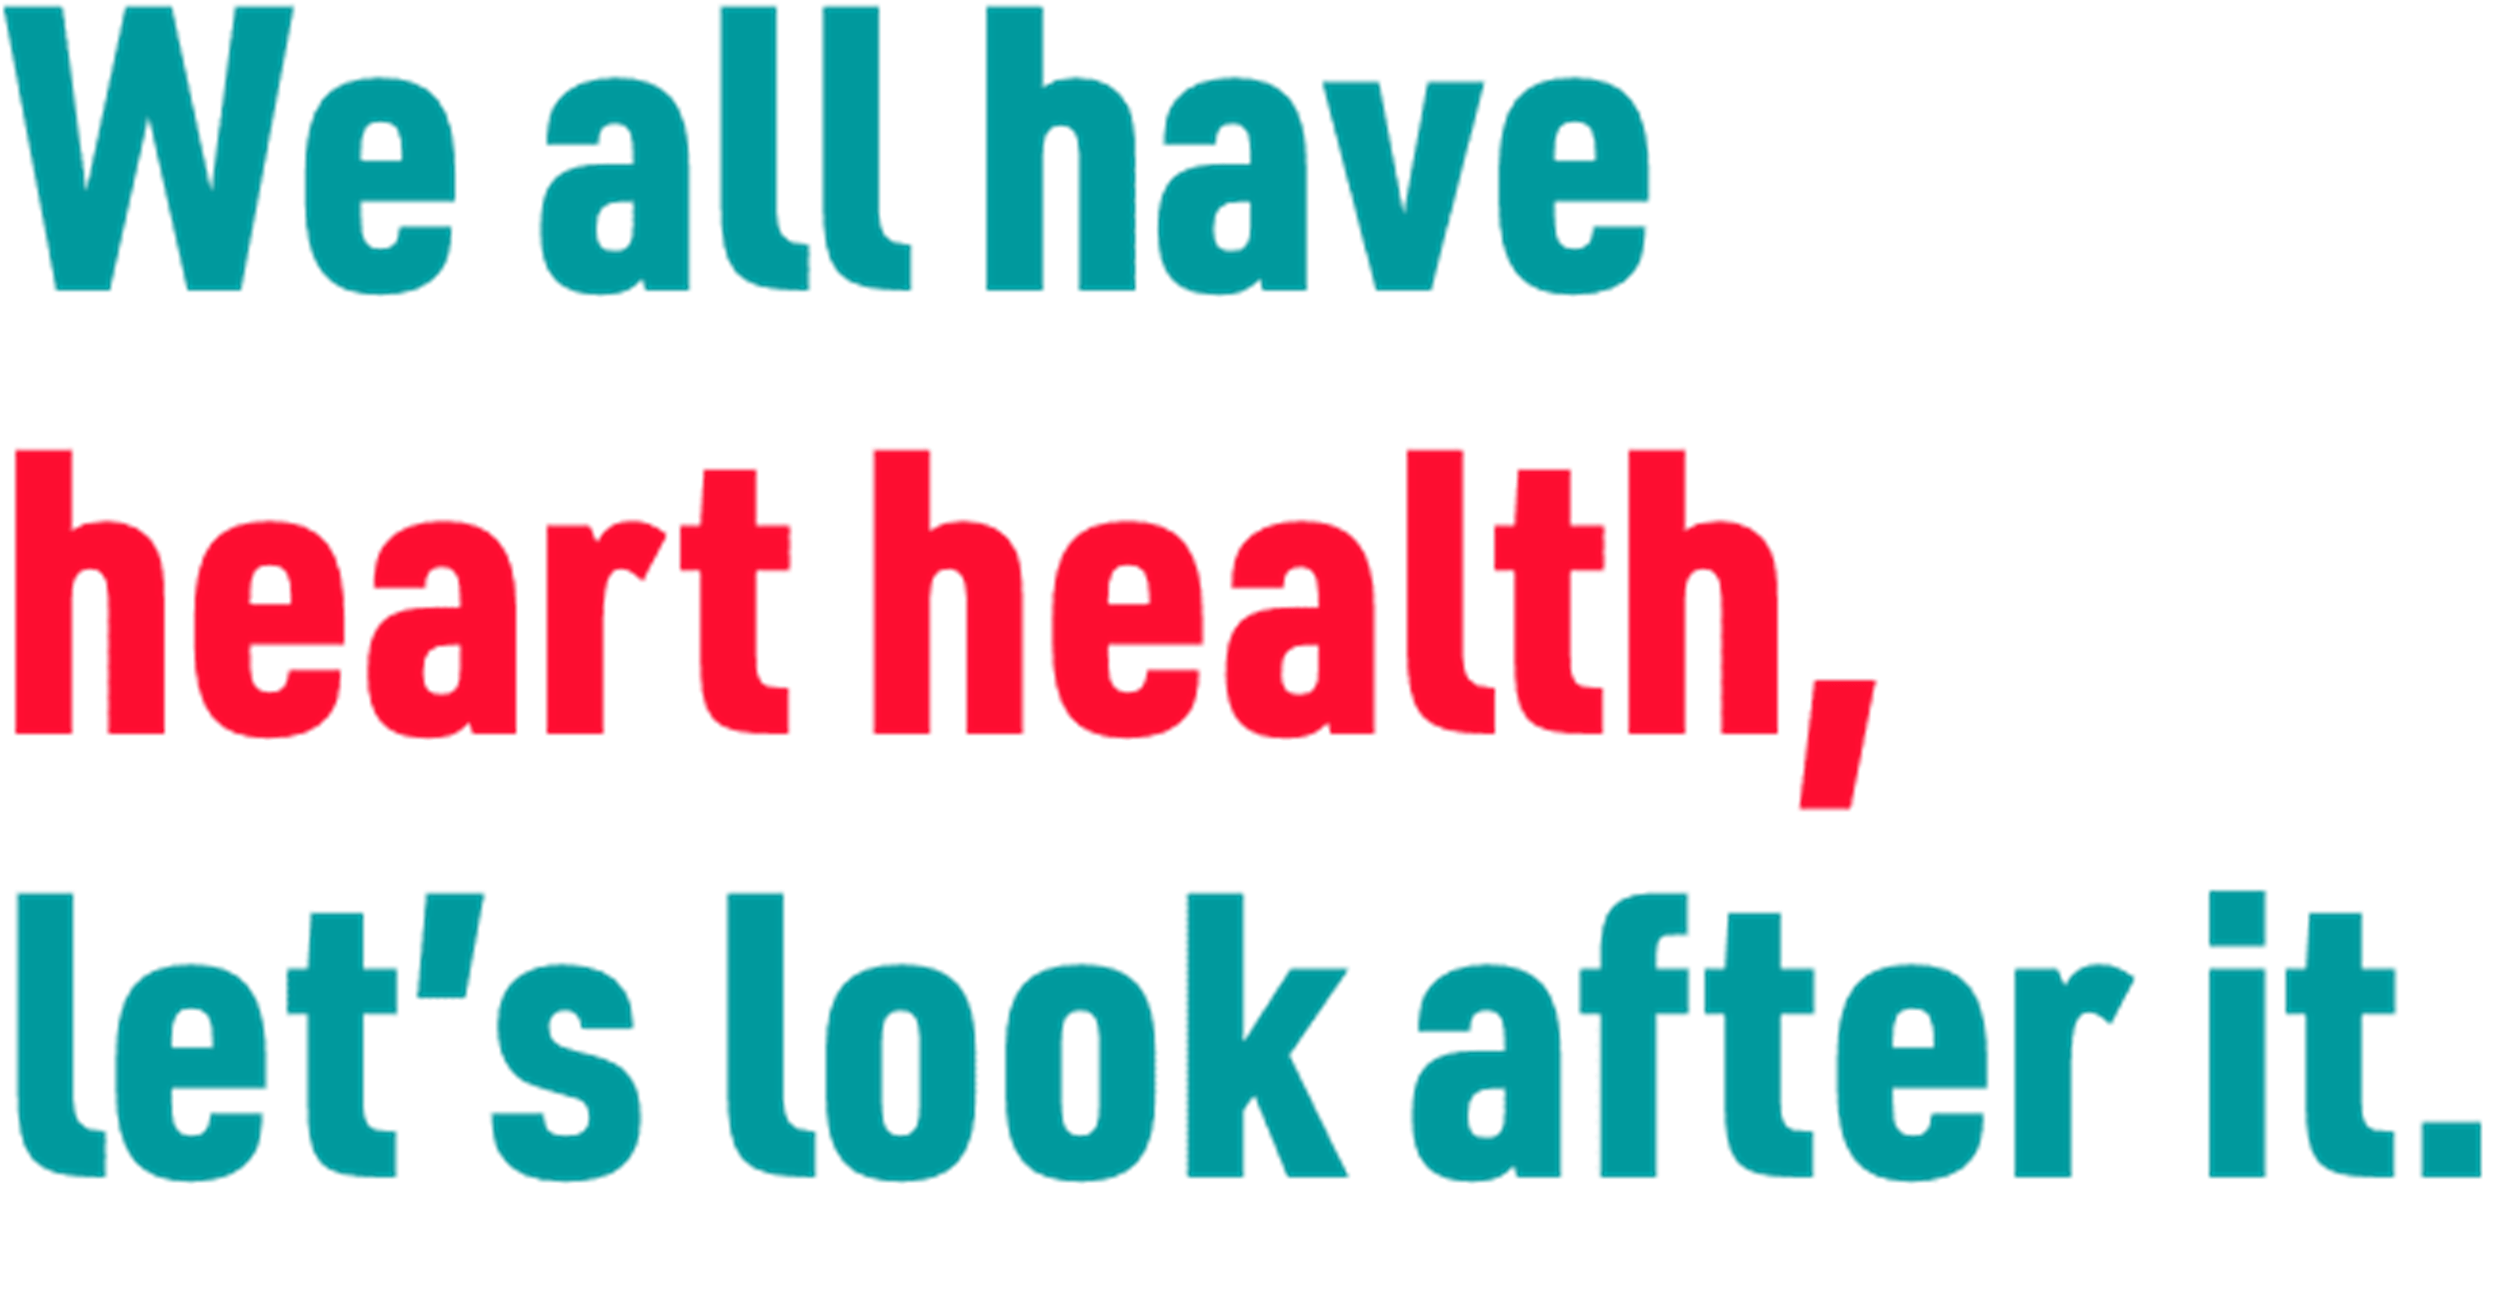 We all have heart health, let's look after it